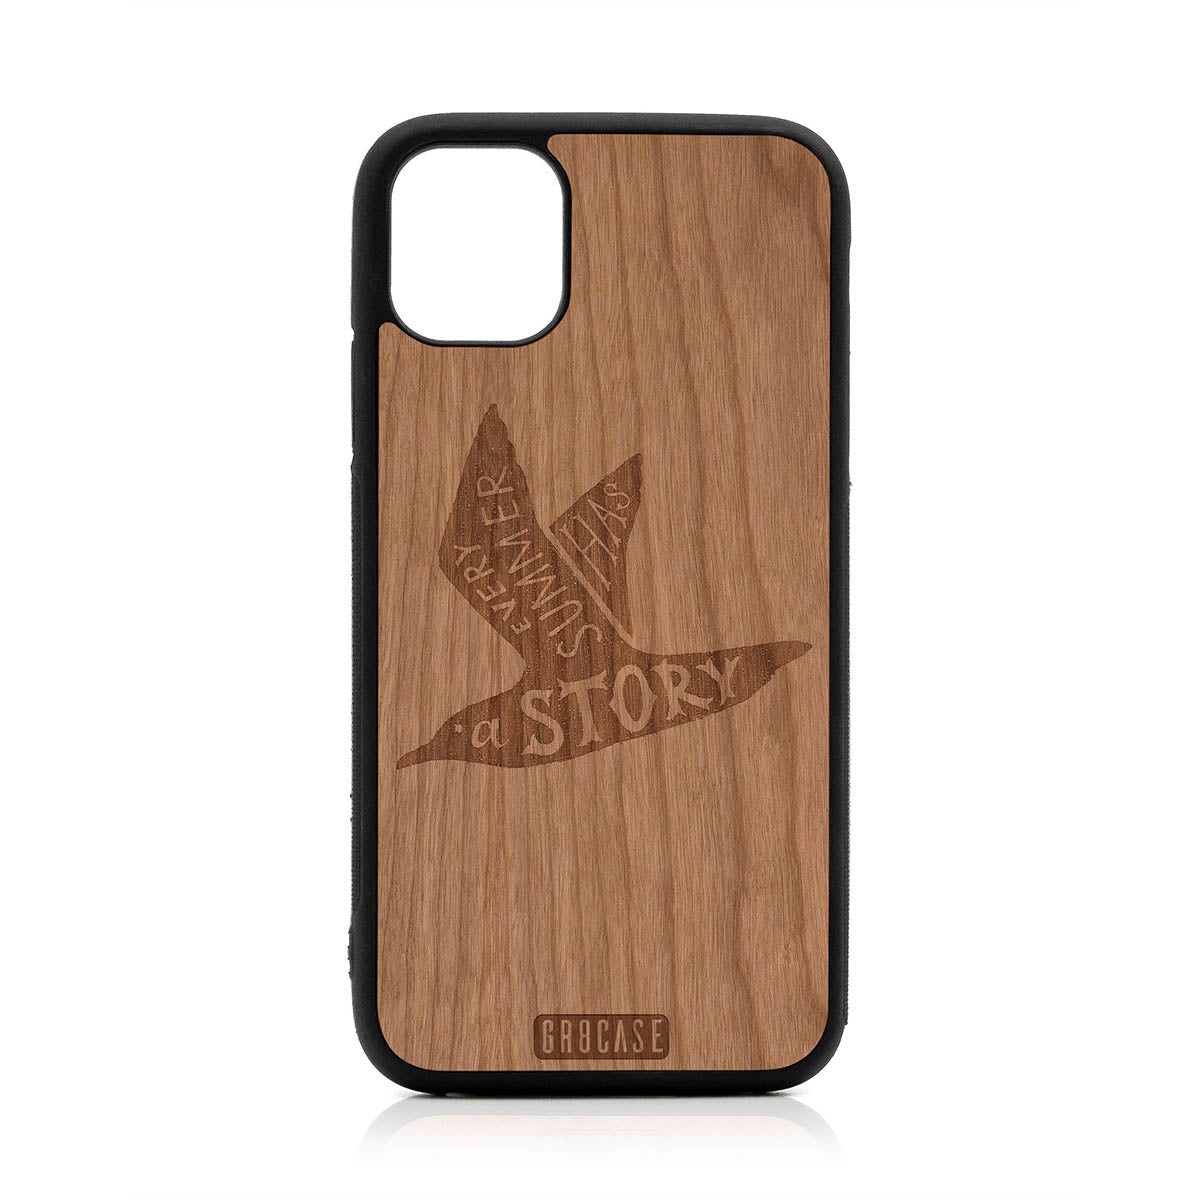 Every Summer Has A Story (Seagull) Design Wood Case For iPhone 11